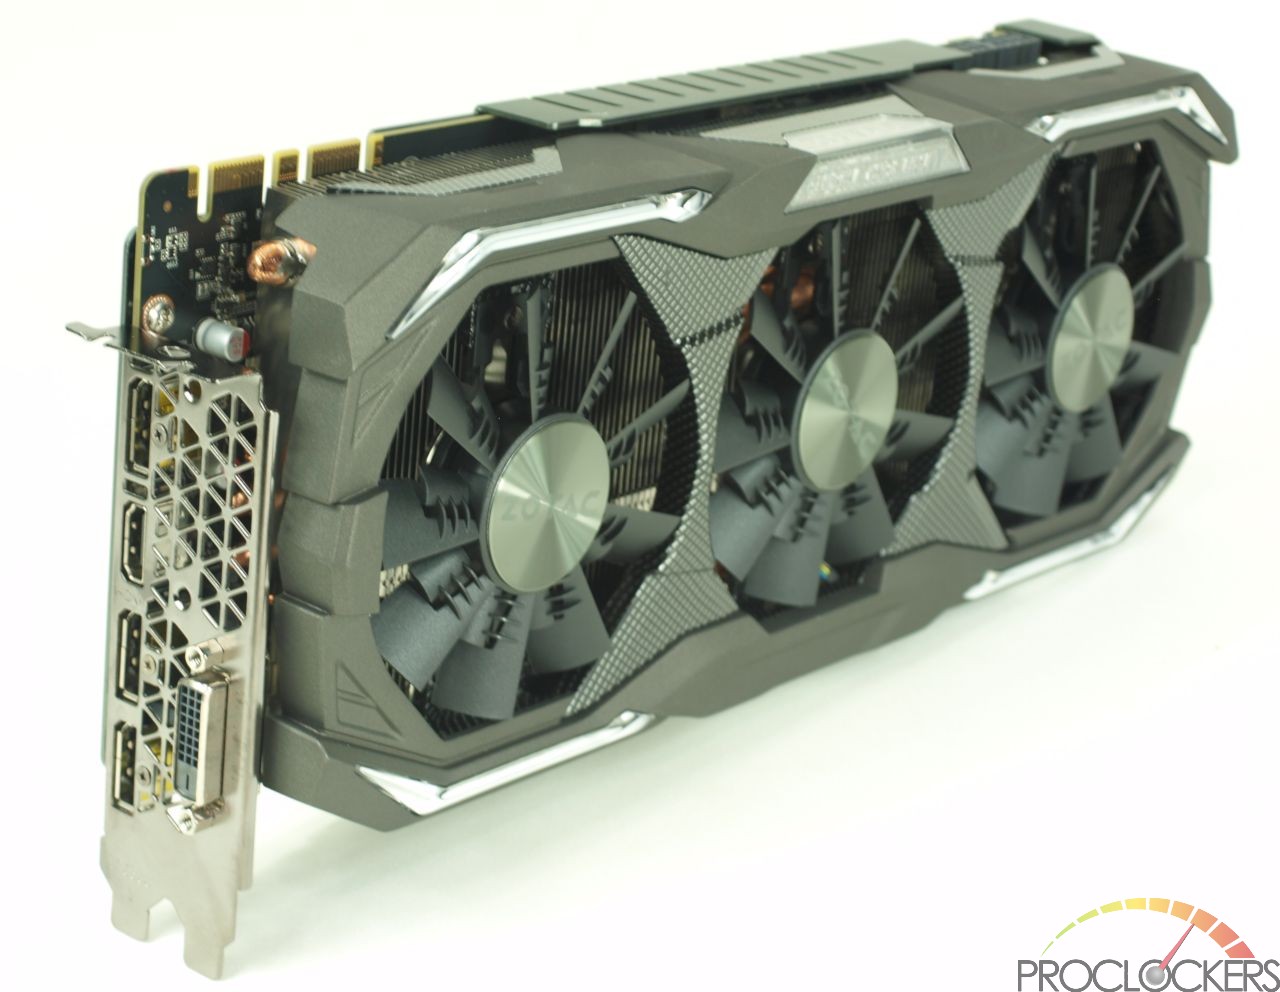 Zotac Gtx 1070ti 8gb Amp Extreme Review, The Beast - Zotac Gtx 1070ti Extreme Amp , HD Wallpaper & Backgrounds